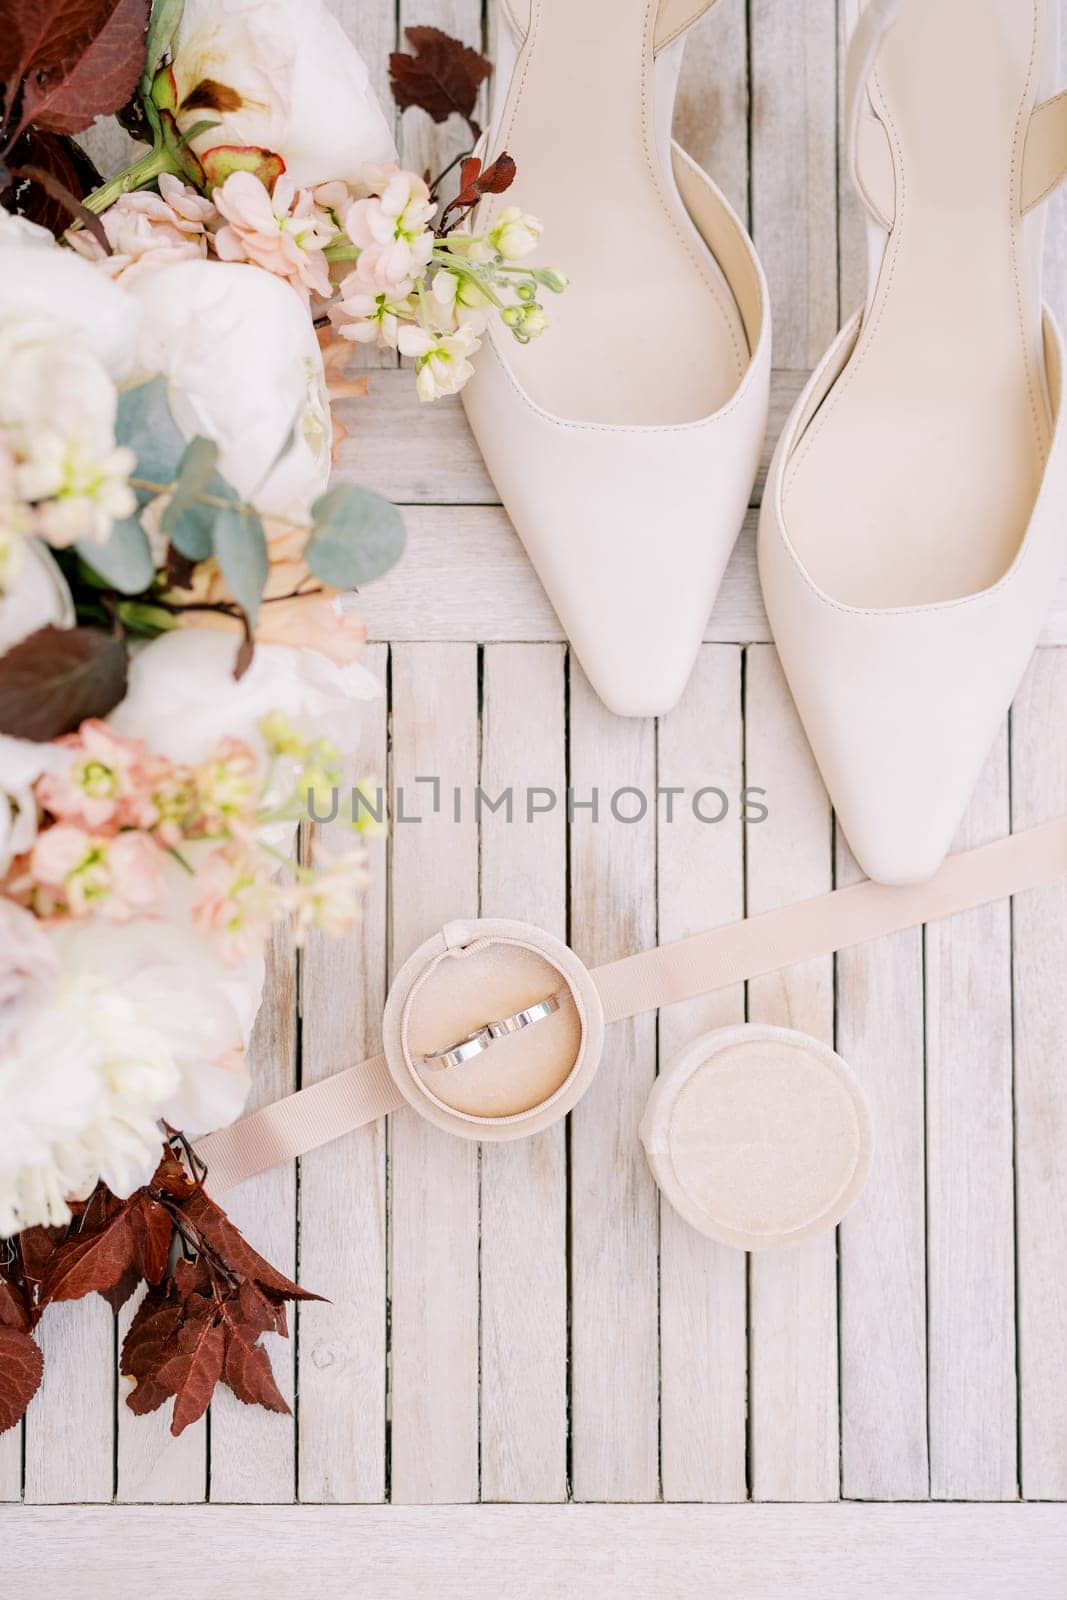 Wedding rings in a box stand on the table near the bride shoes and a bouquet of flowers. Top view by Nadtochiy